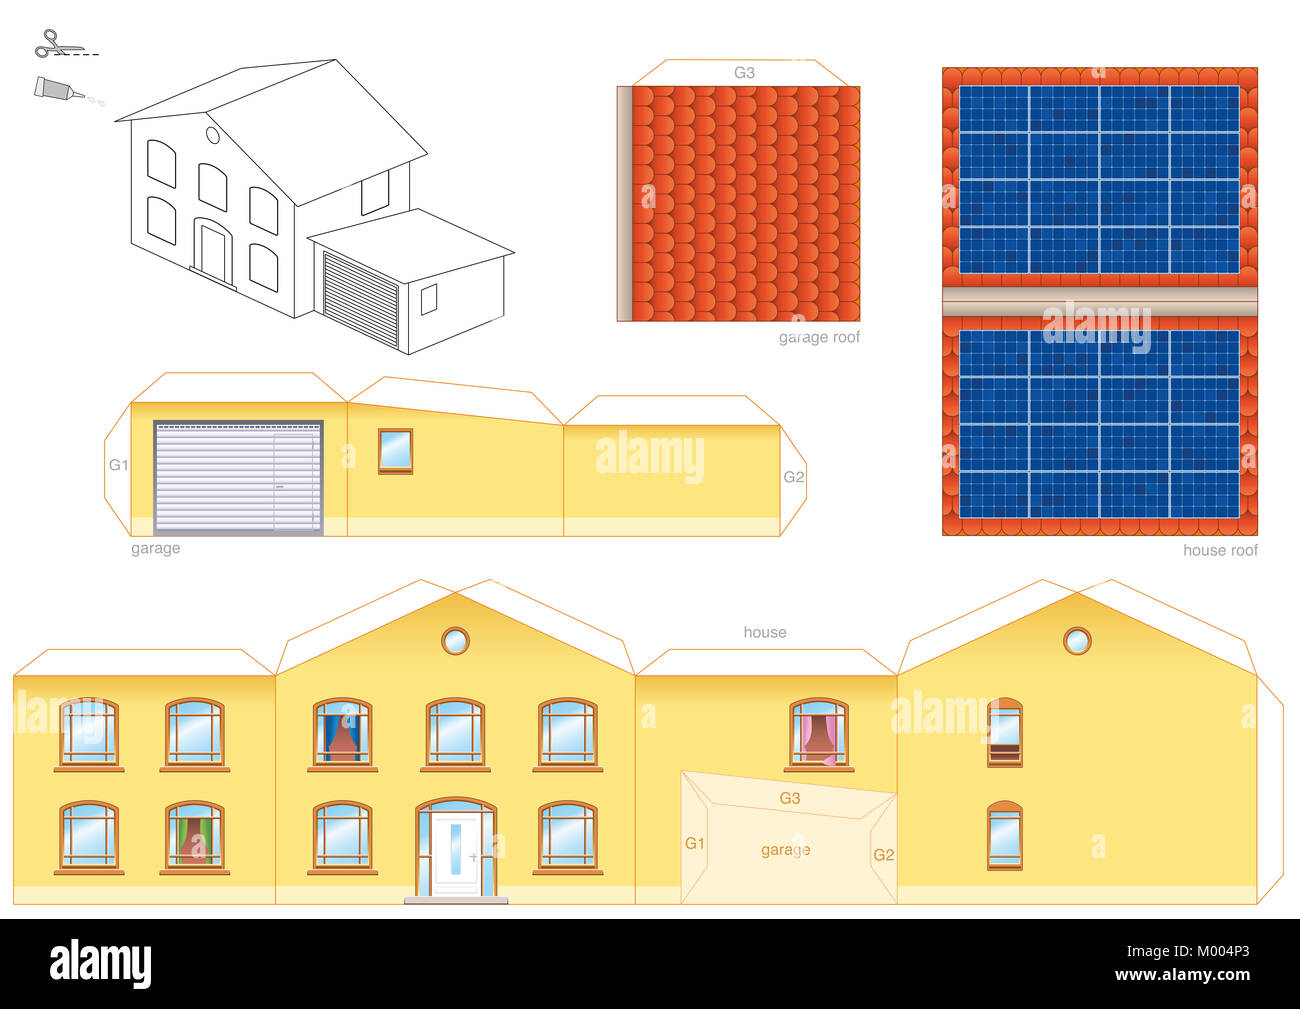 Papercraft model of a house with solar thermal collector on the roof, photovoltaic technology - cut-out sheet for making a scale model house. Stock Photo